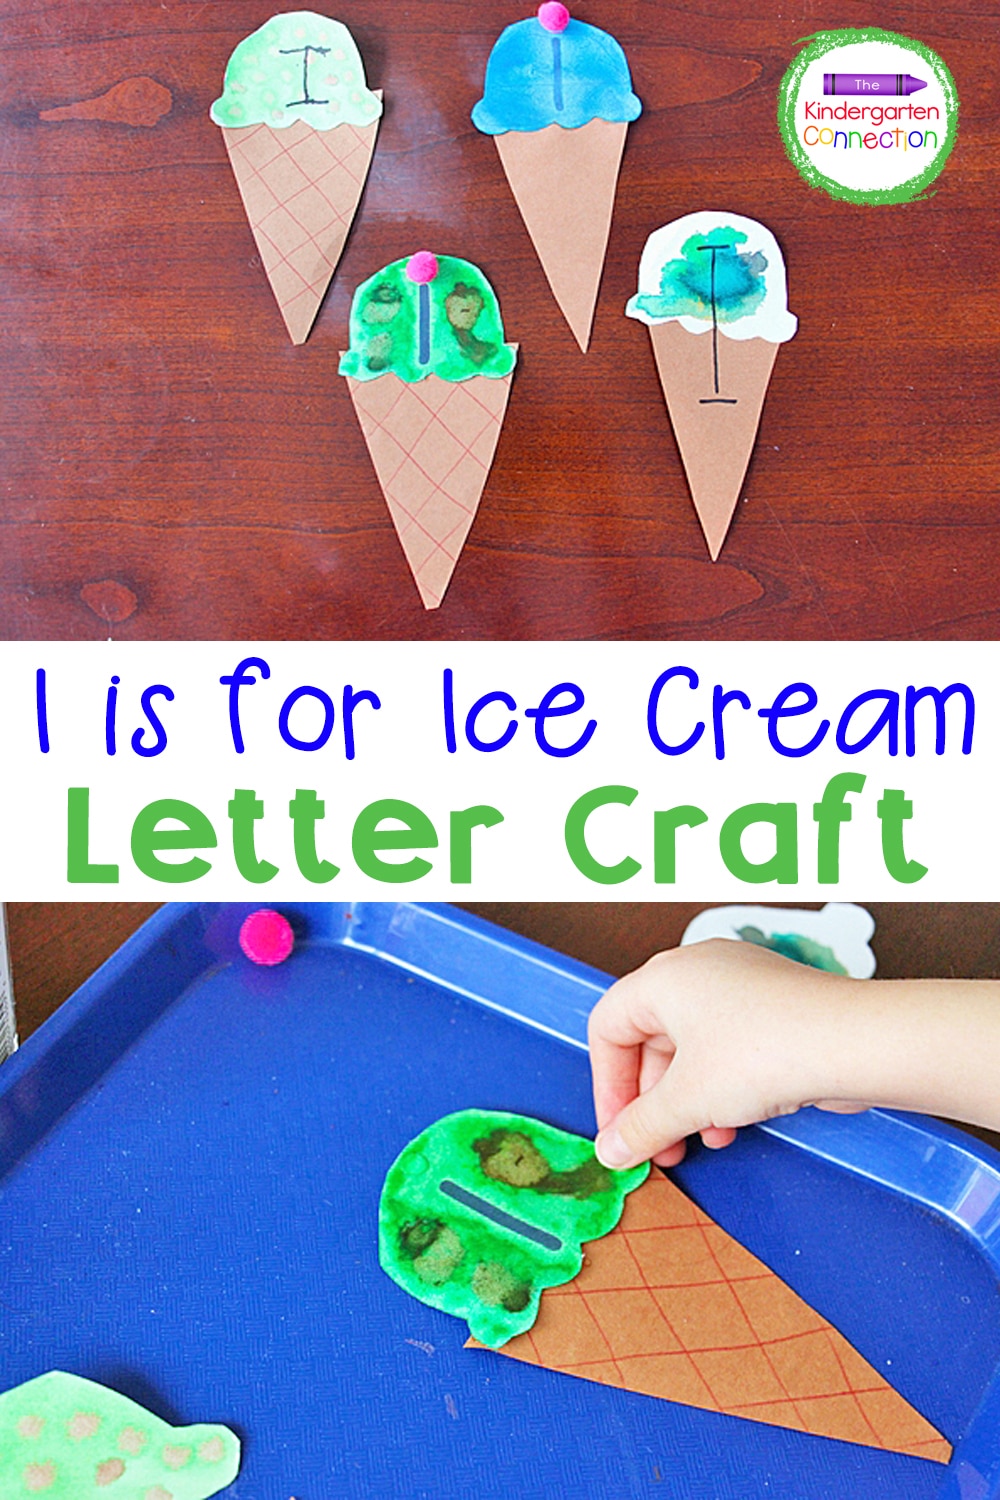 My kids love ice cream, so it was obvious to choose I is for Ice Cream as the Letter I Craft for this week's Kindergarten Letter Craft!